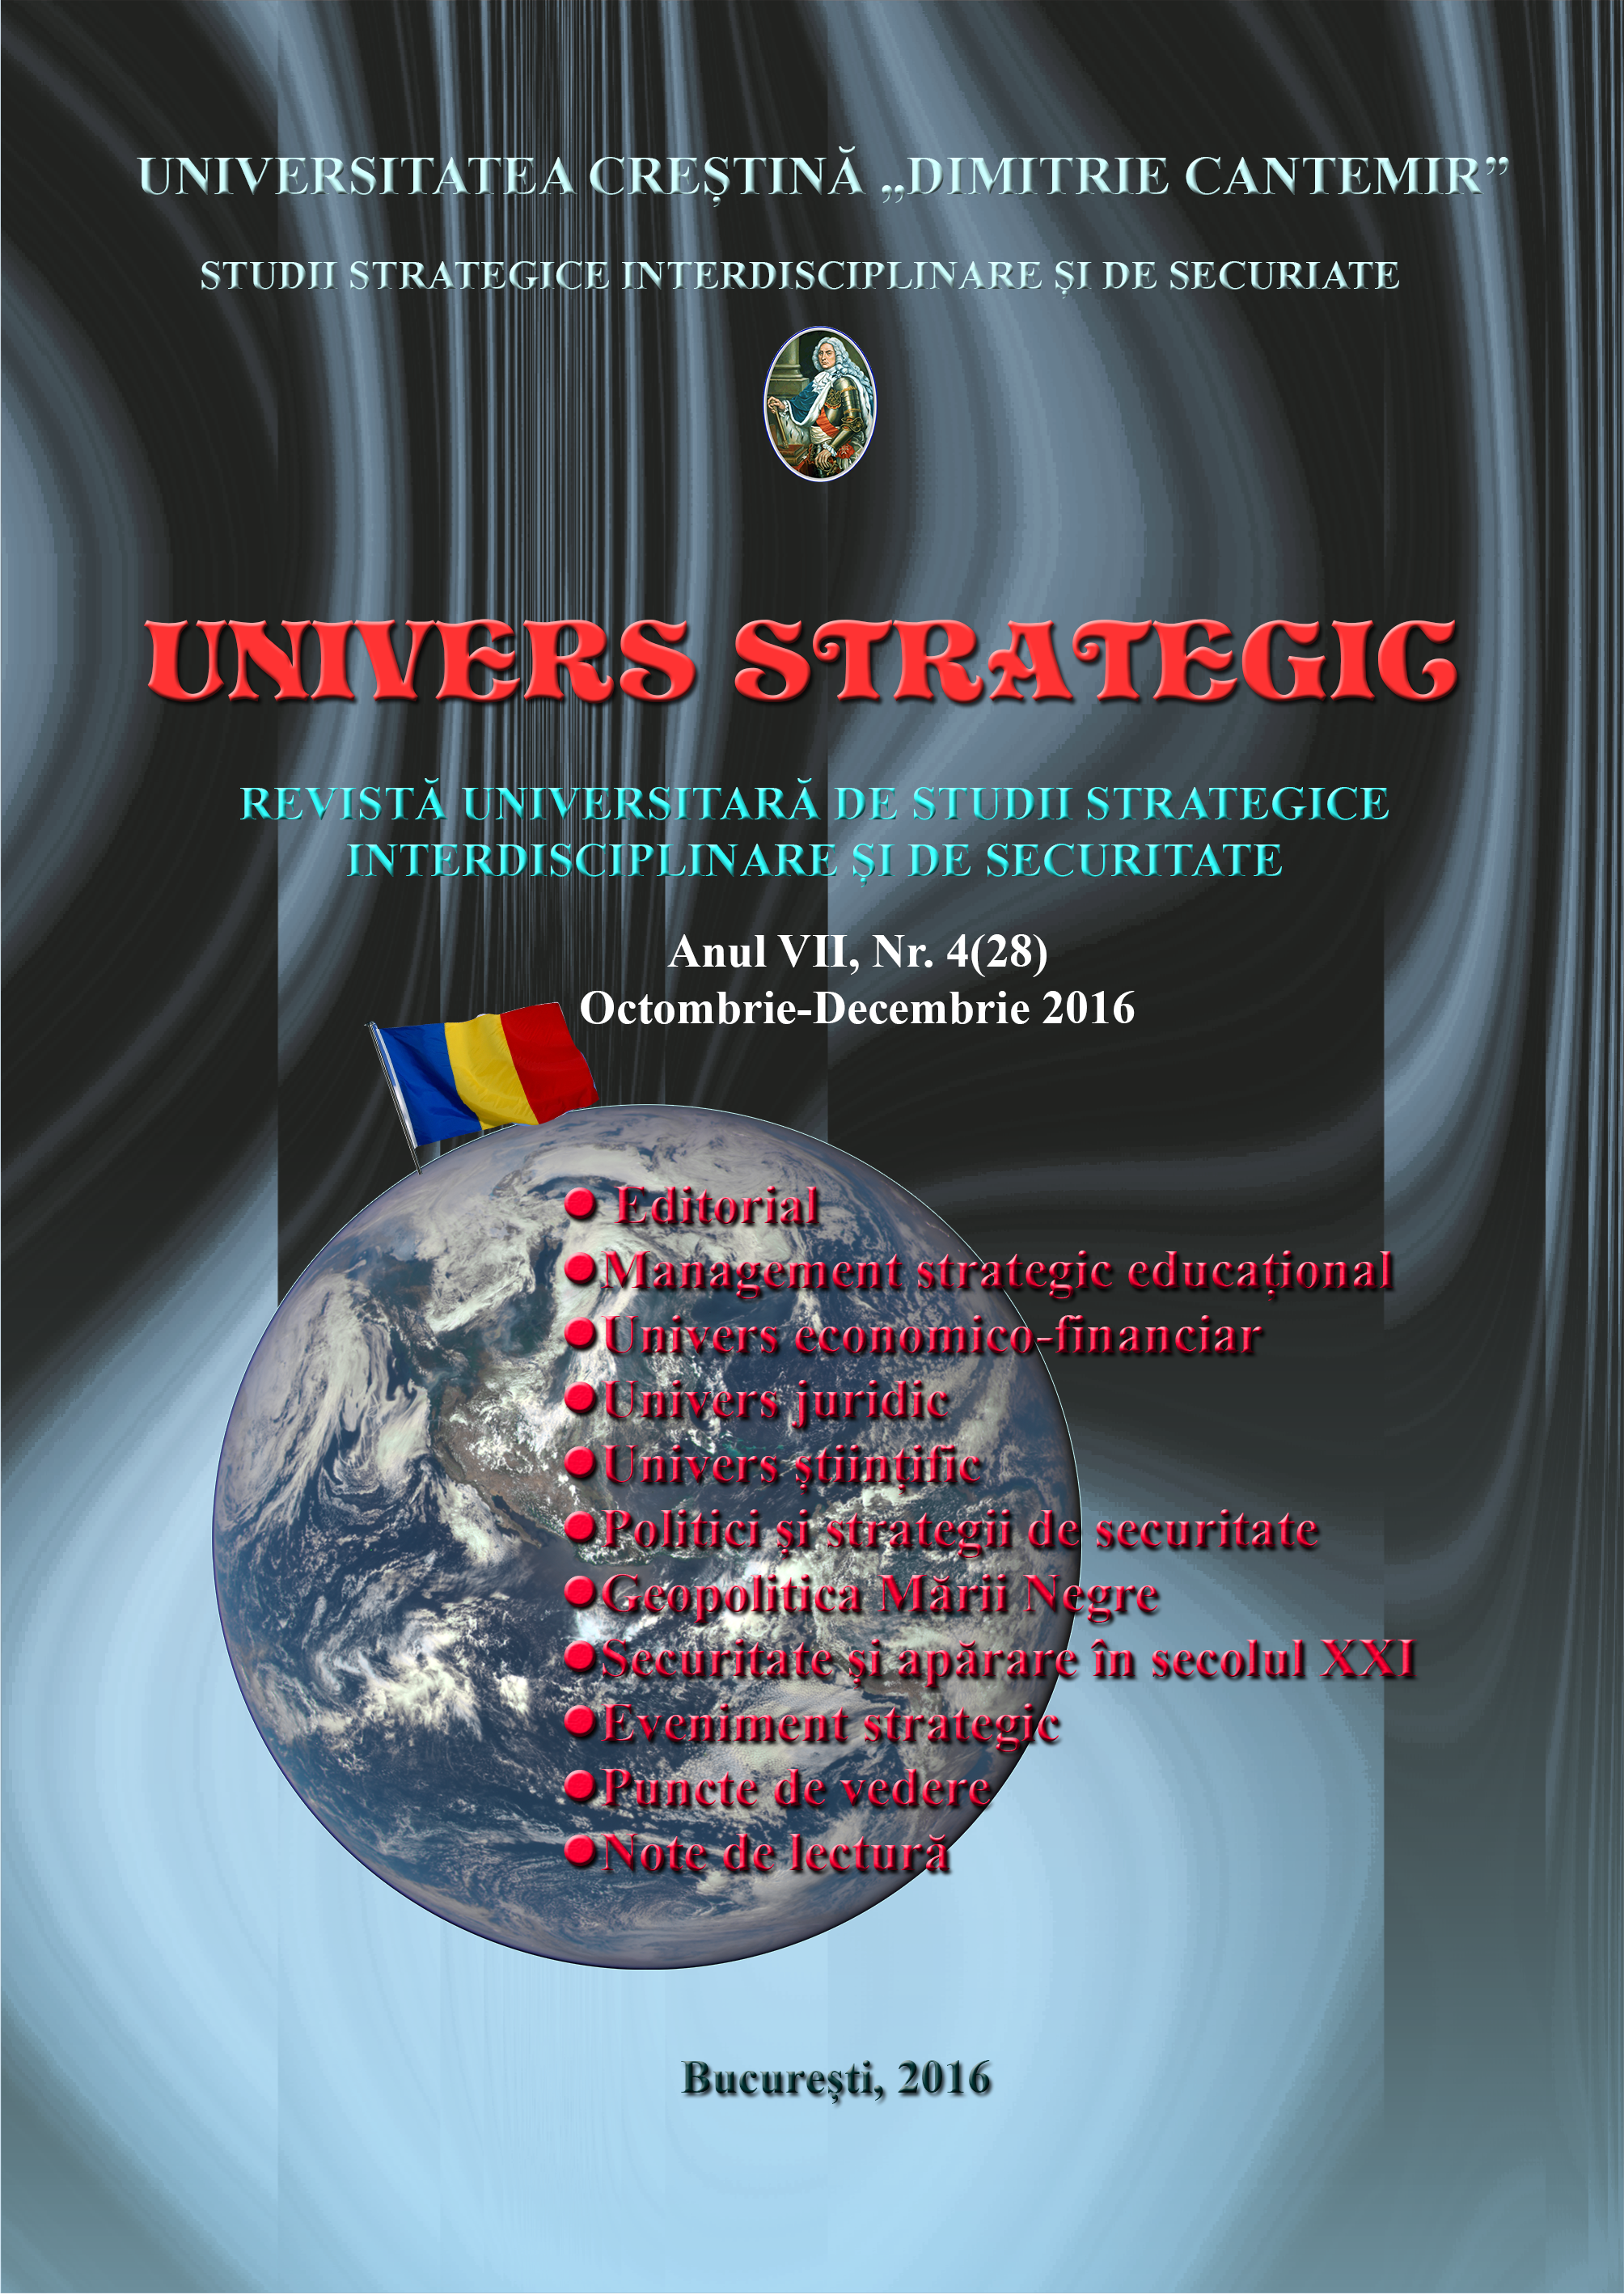 THE EUROPEAN JUDICIAL NETWORK - EUROPEAN STRUCTURE FOR COOPERATION IN JUSTICE Cover Image